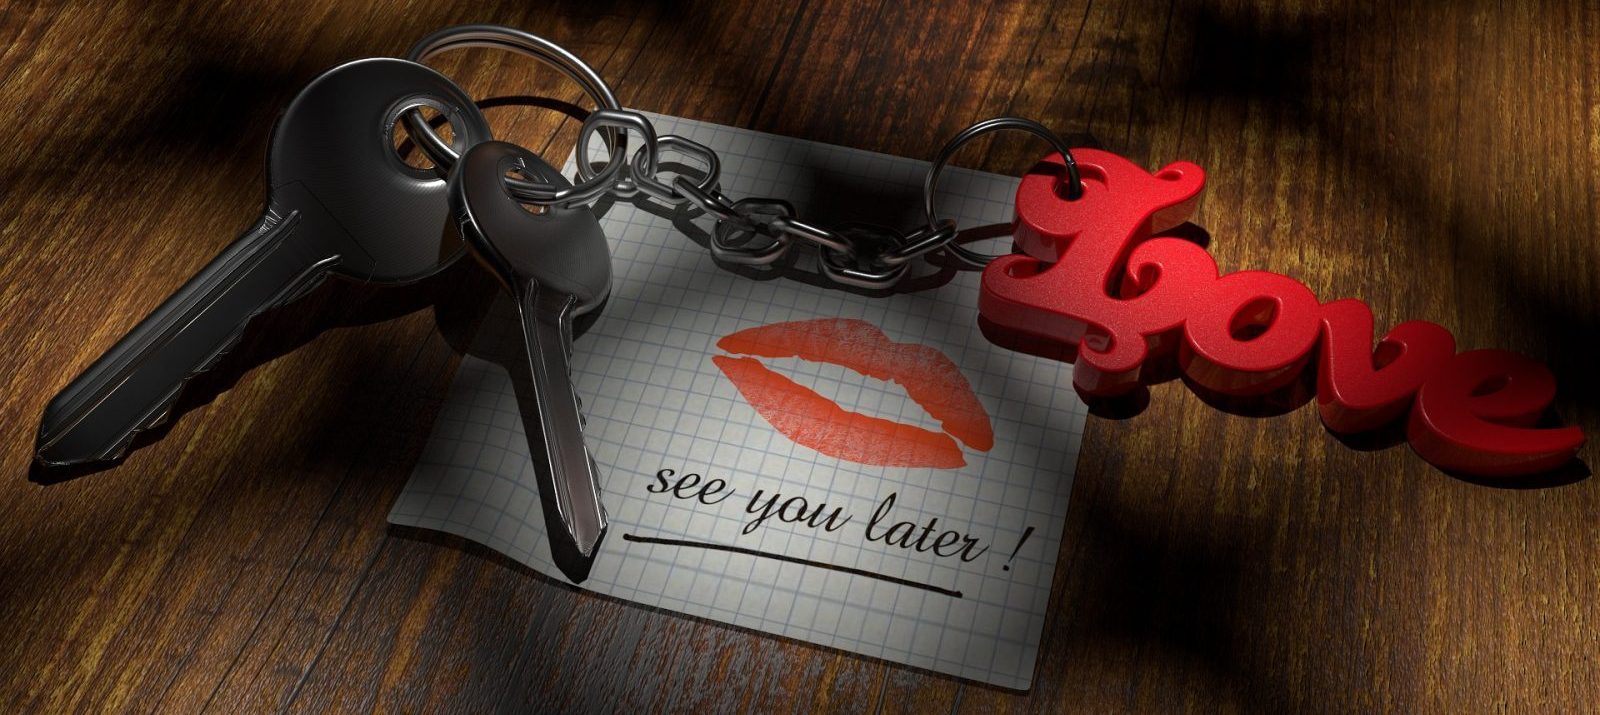 moving in together: keys on a "love" keychain on top of a note that has red lipstick imprints and reads "see you later"